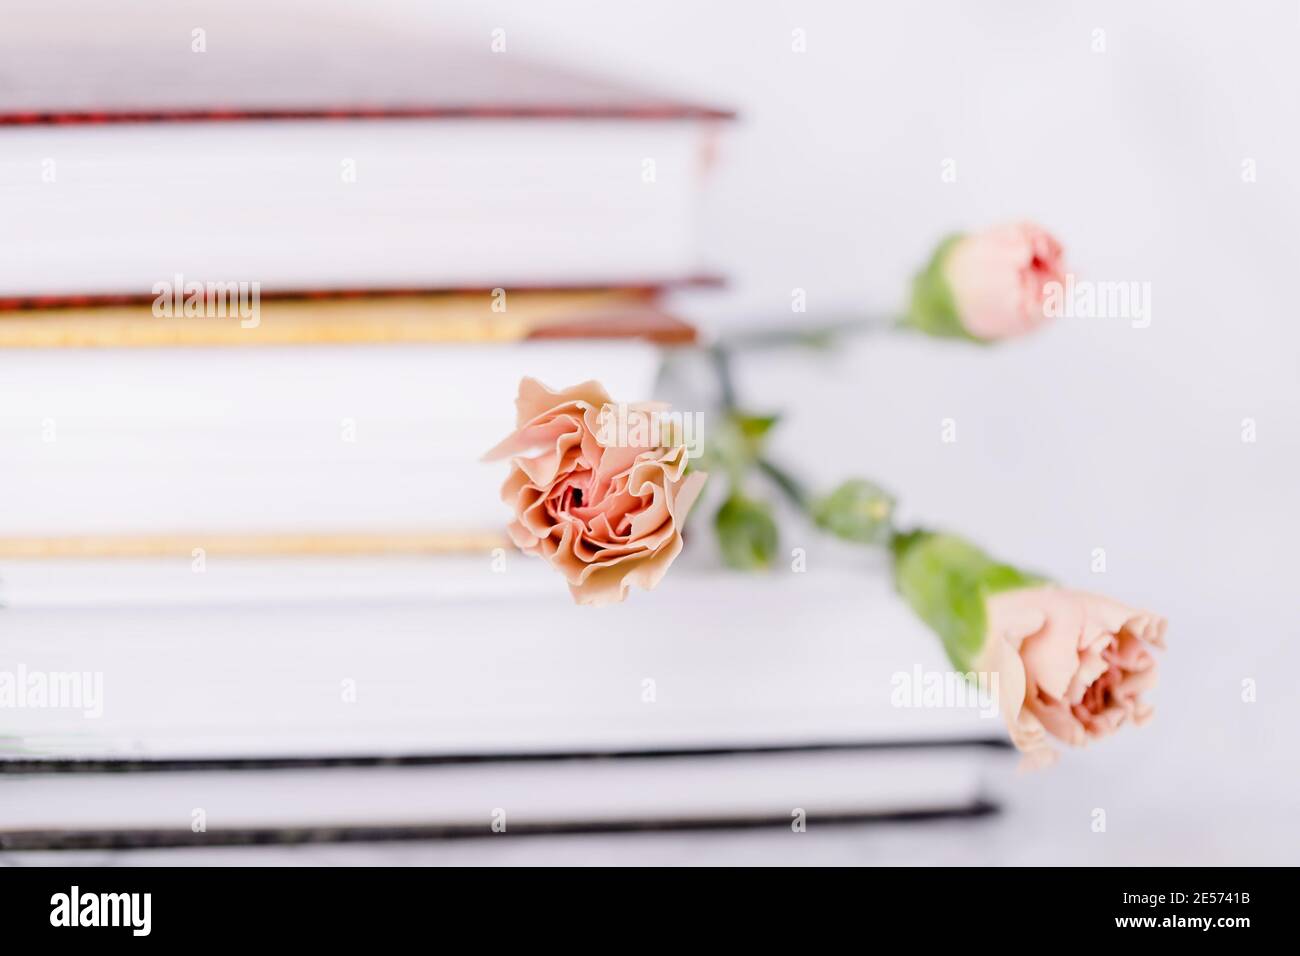 Tea rose color carnation flower on a light stack of books background Stock Photo